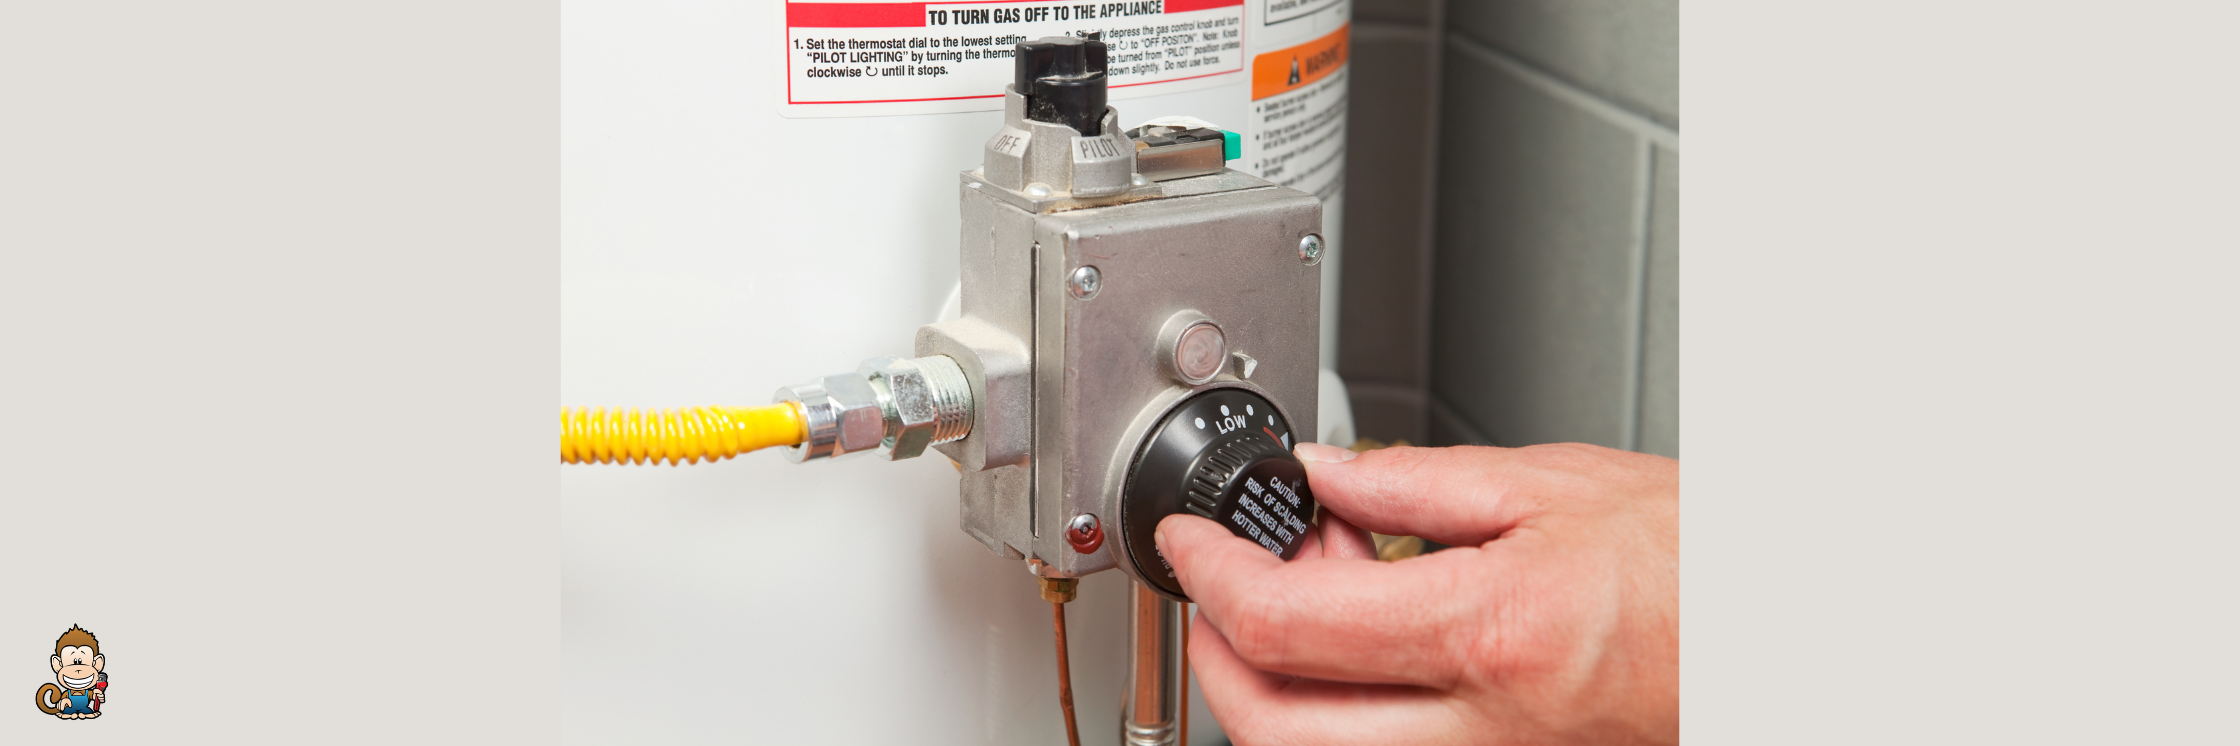 How to Relight a Pilot Light on a Water Heater